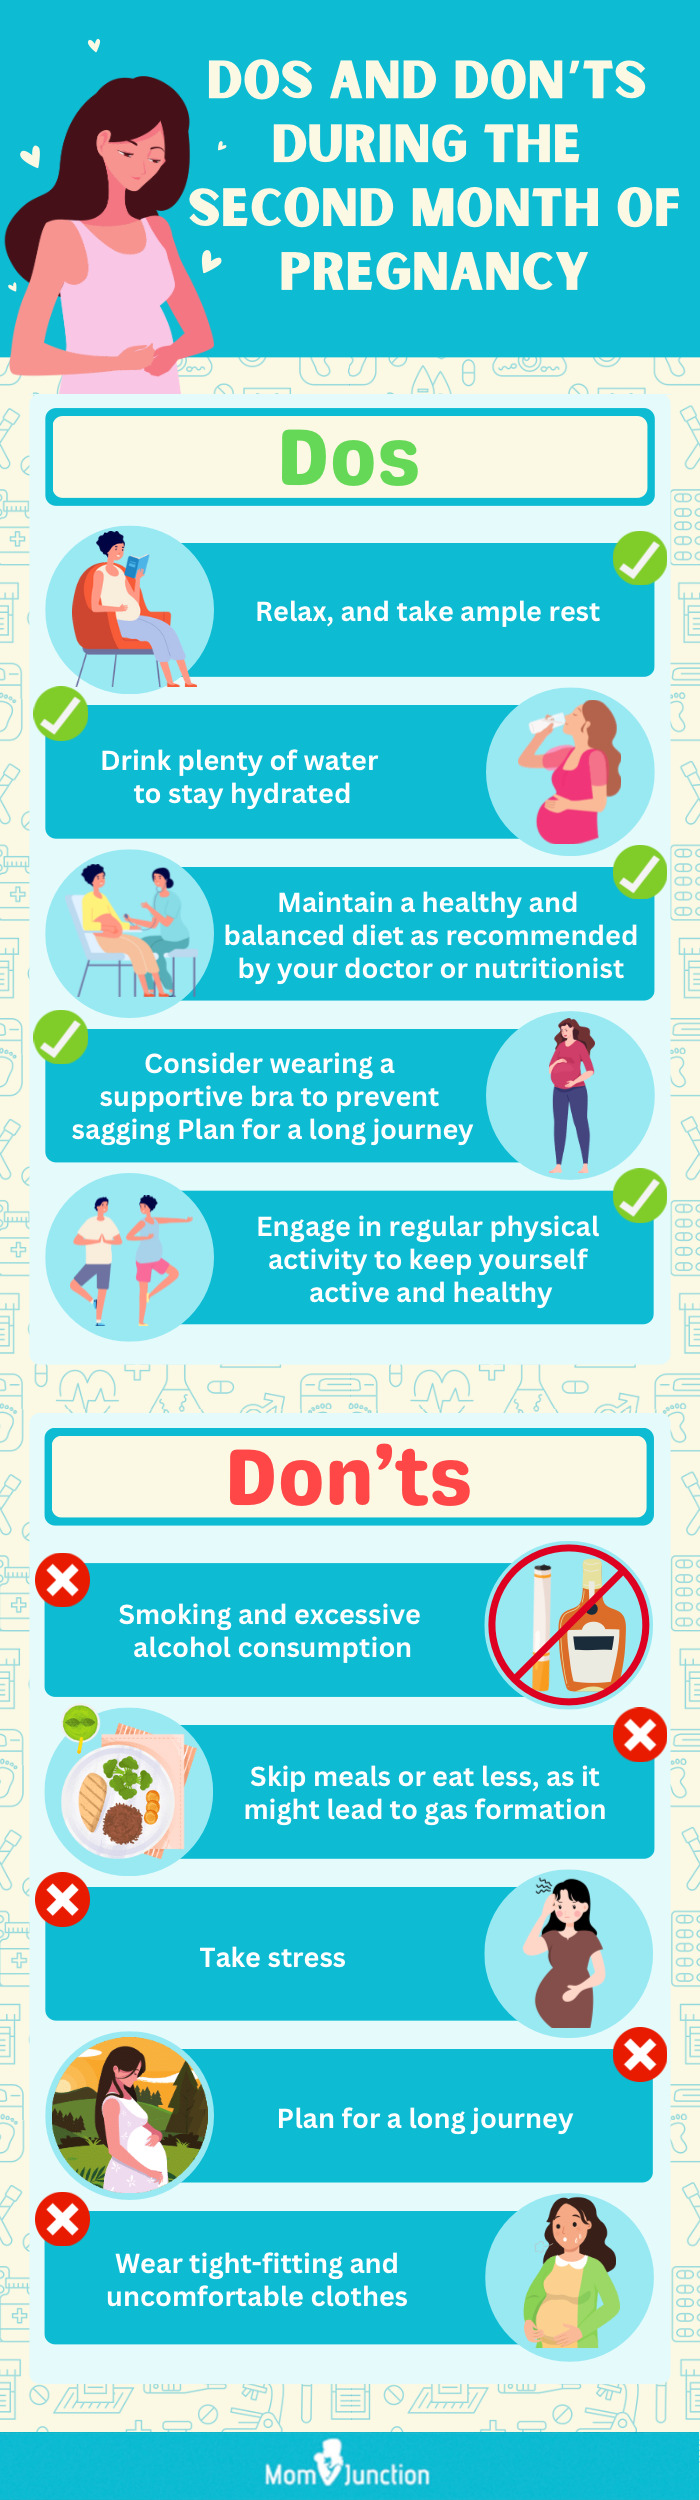 dos and don'ts during the second month of pregnancy (infographic)